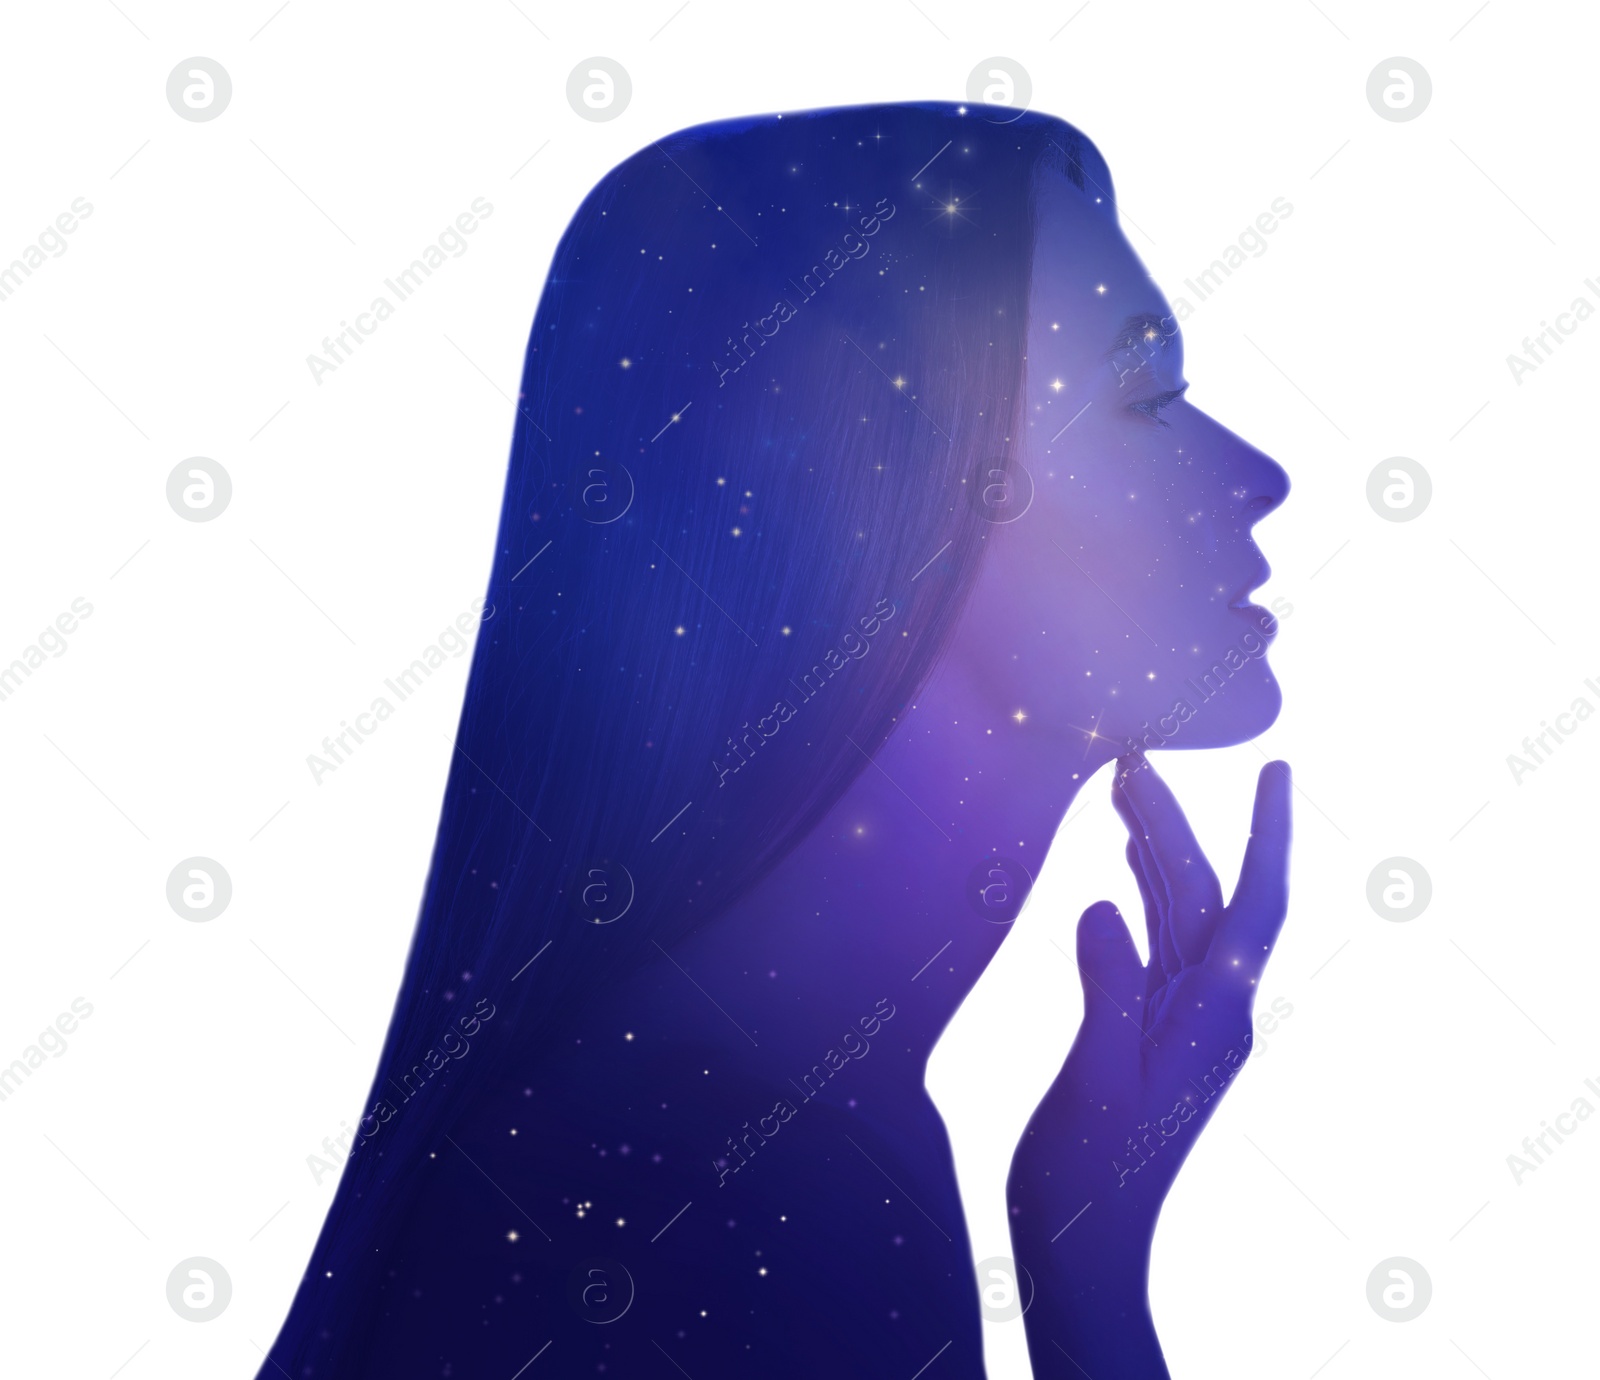 Image of Universe hidden in human, mindfulness, imagination, art, creativity, inner power concepts. Silhouette of woman and starry sky or galaxy on white background, double exposure